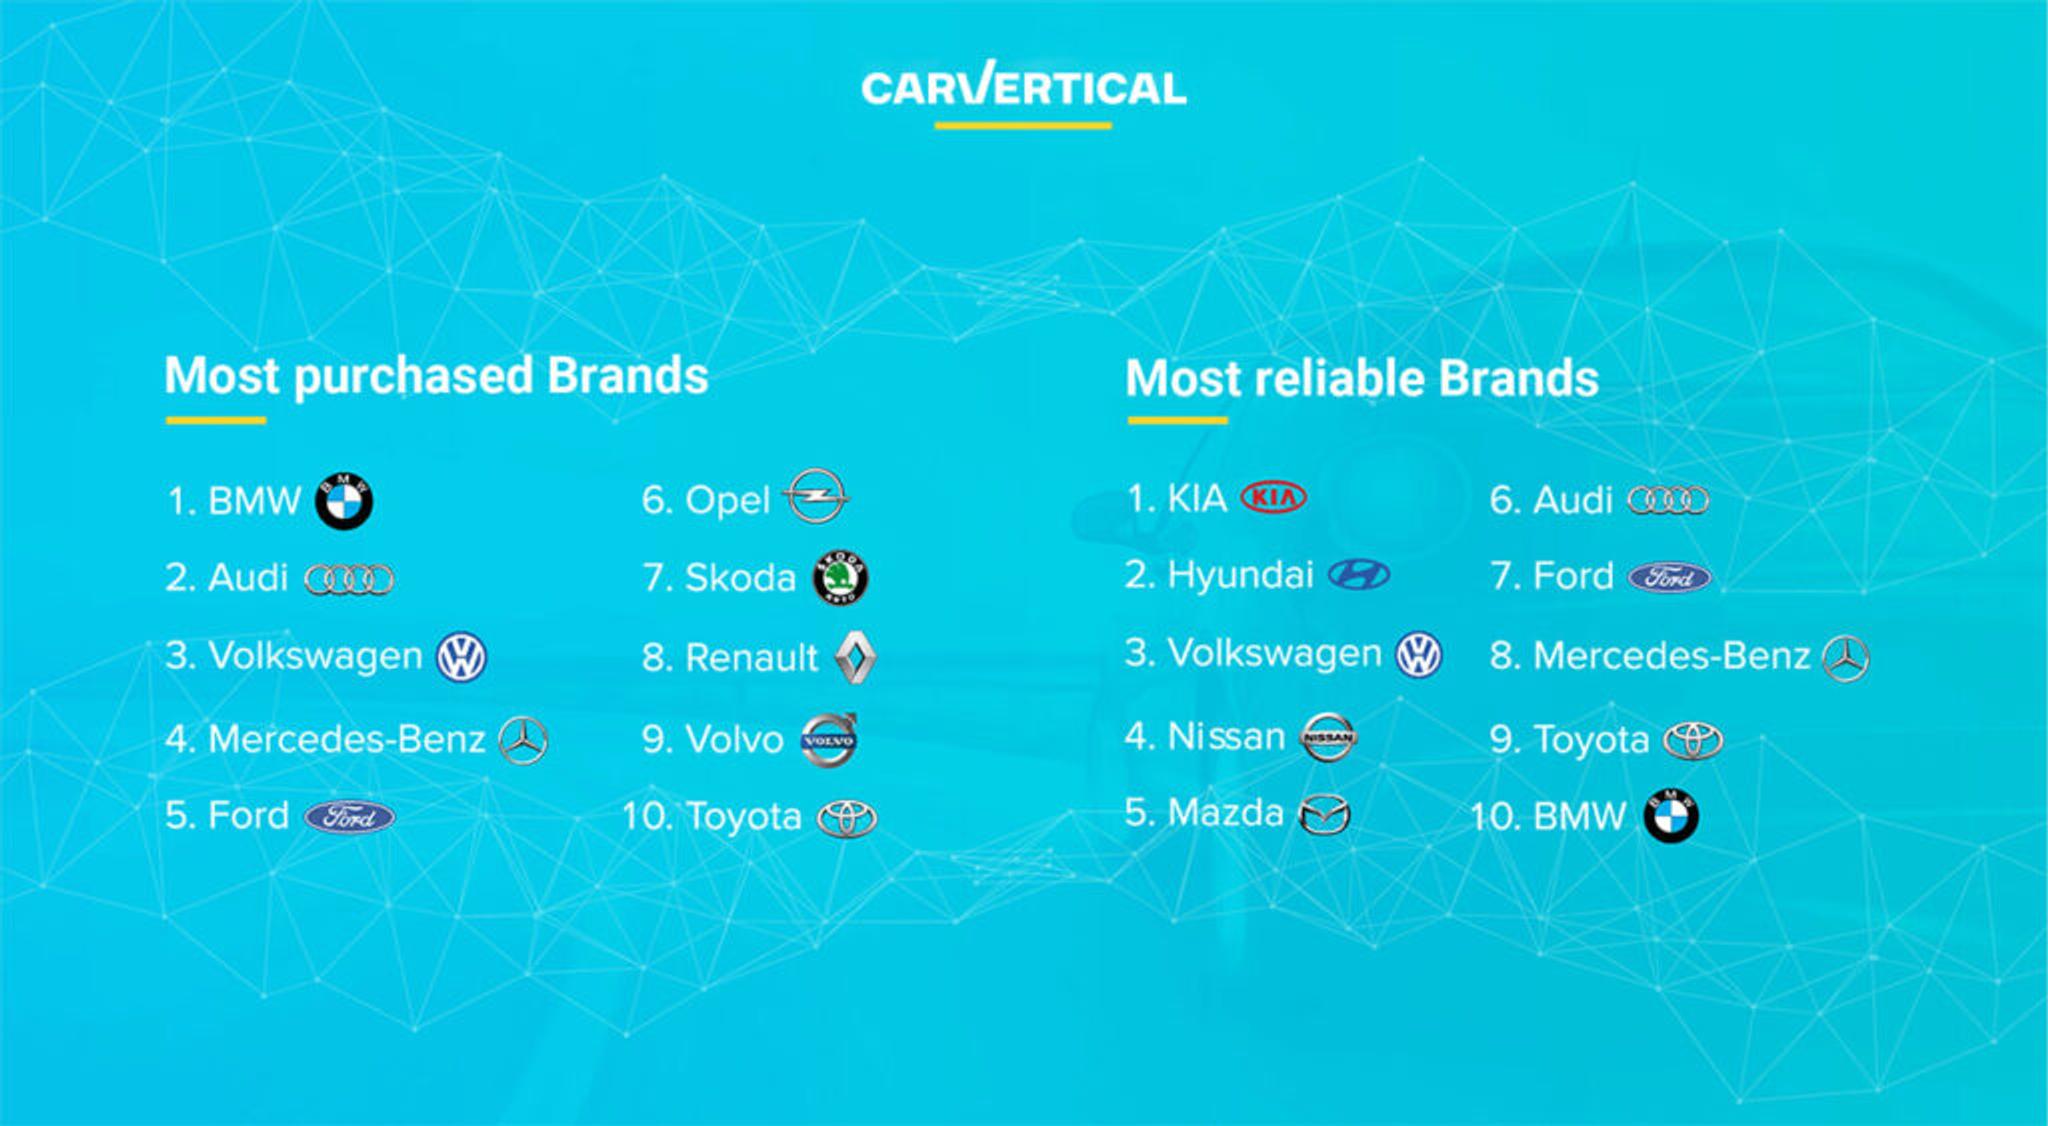 Most purchased and reliable cars by brand